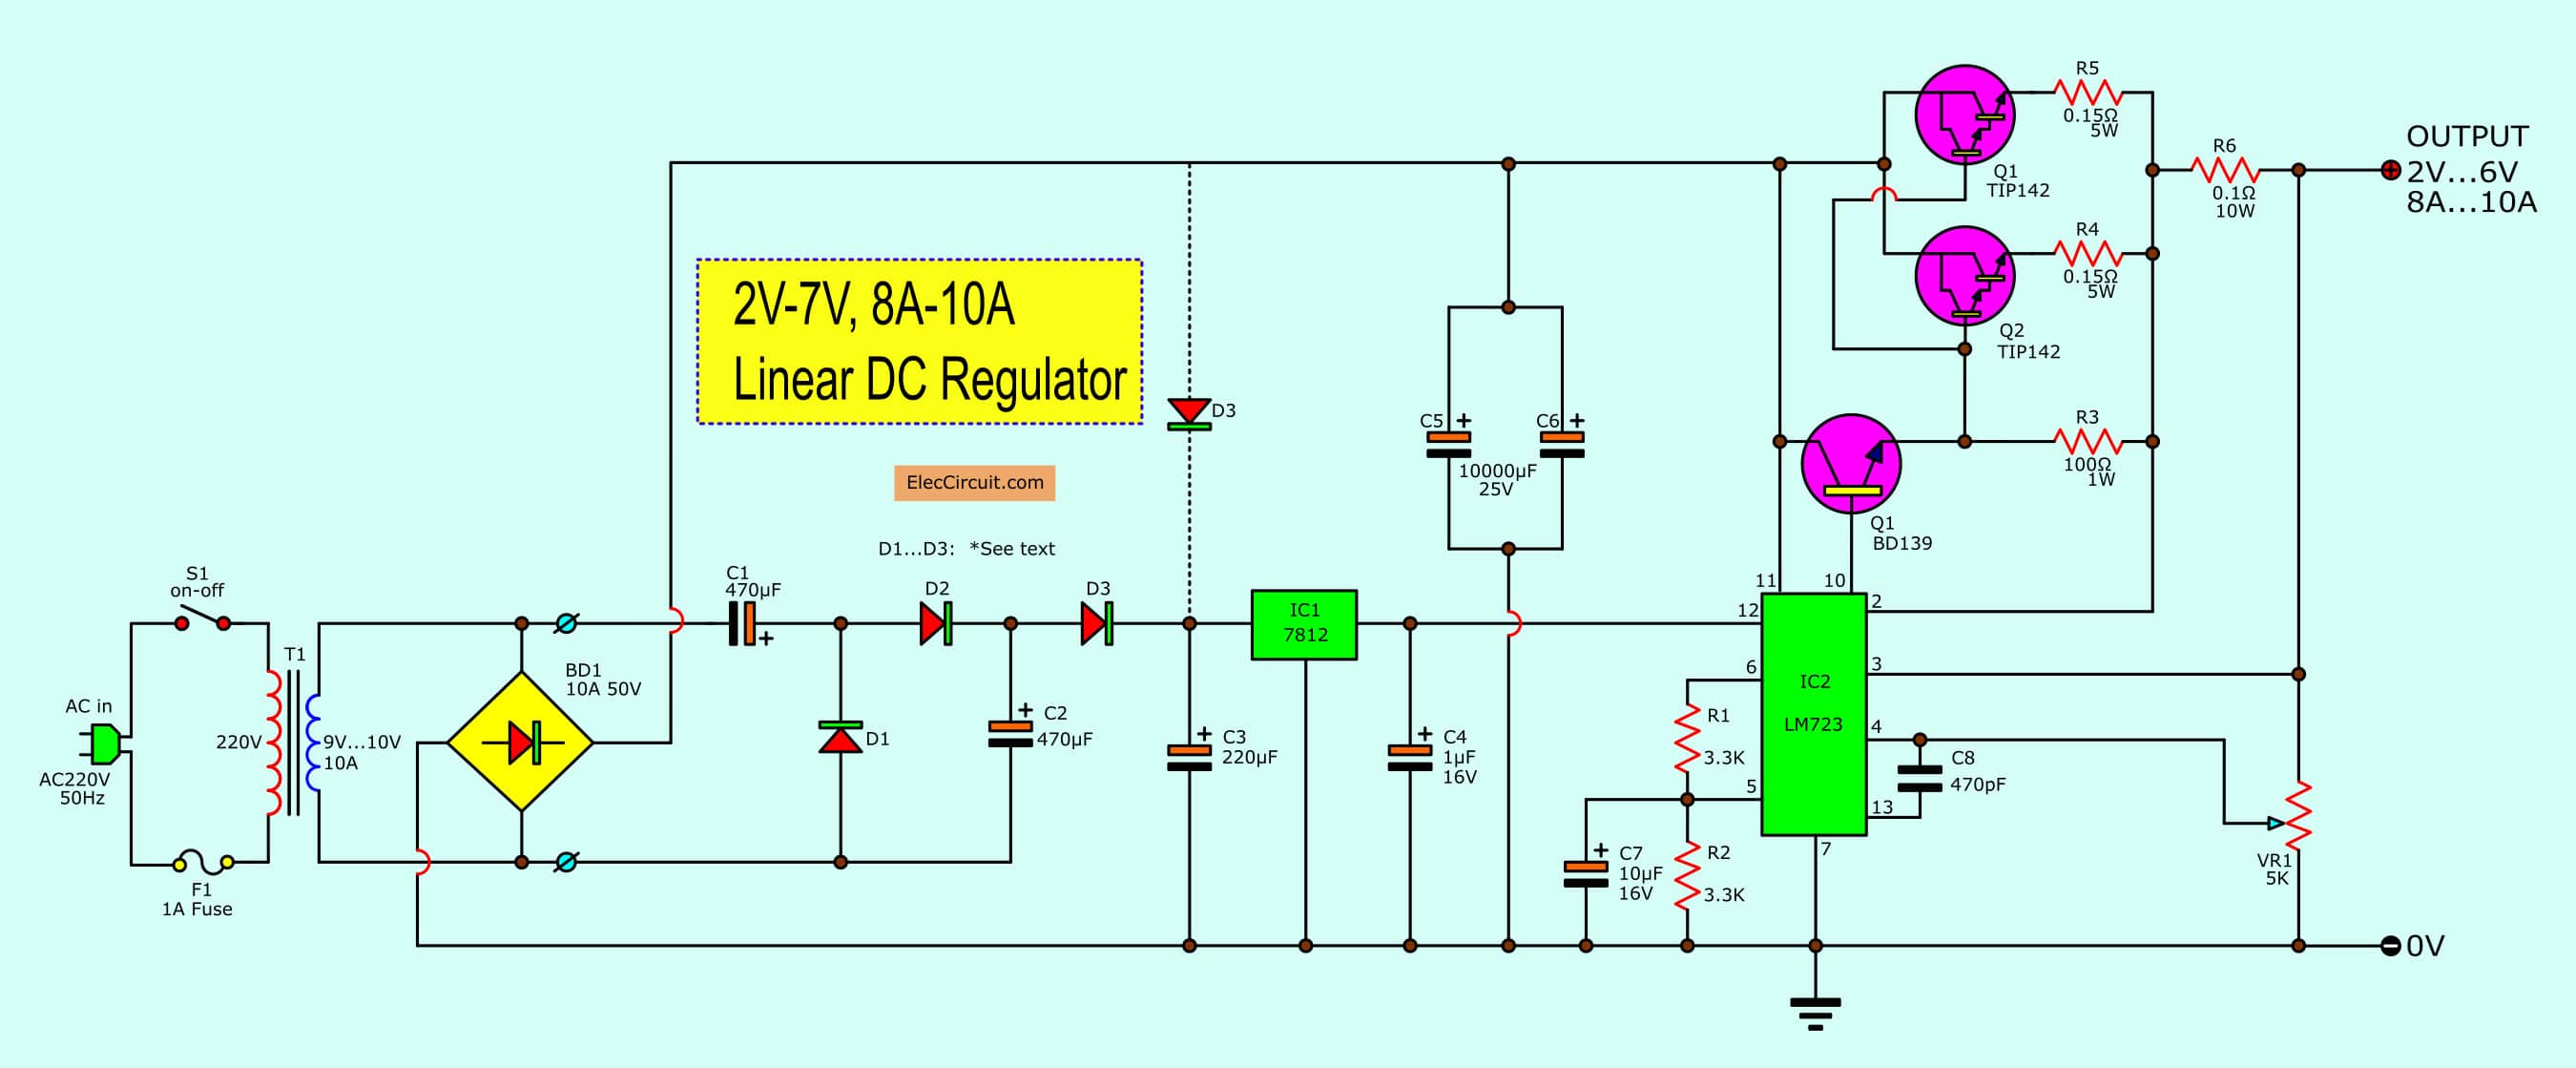 How to make 12v 5A Power Supply, 2N3055